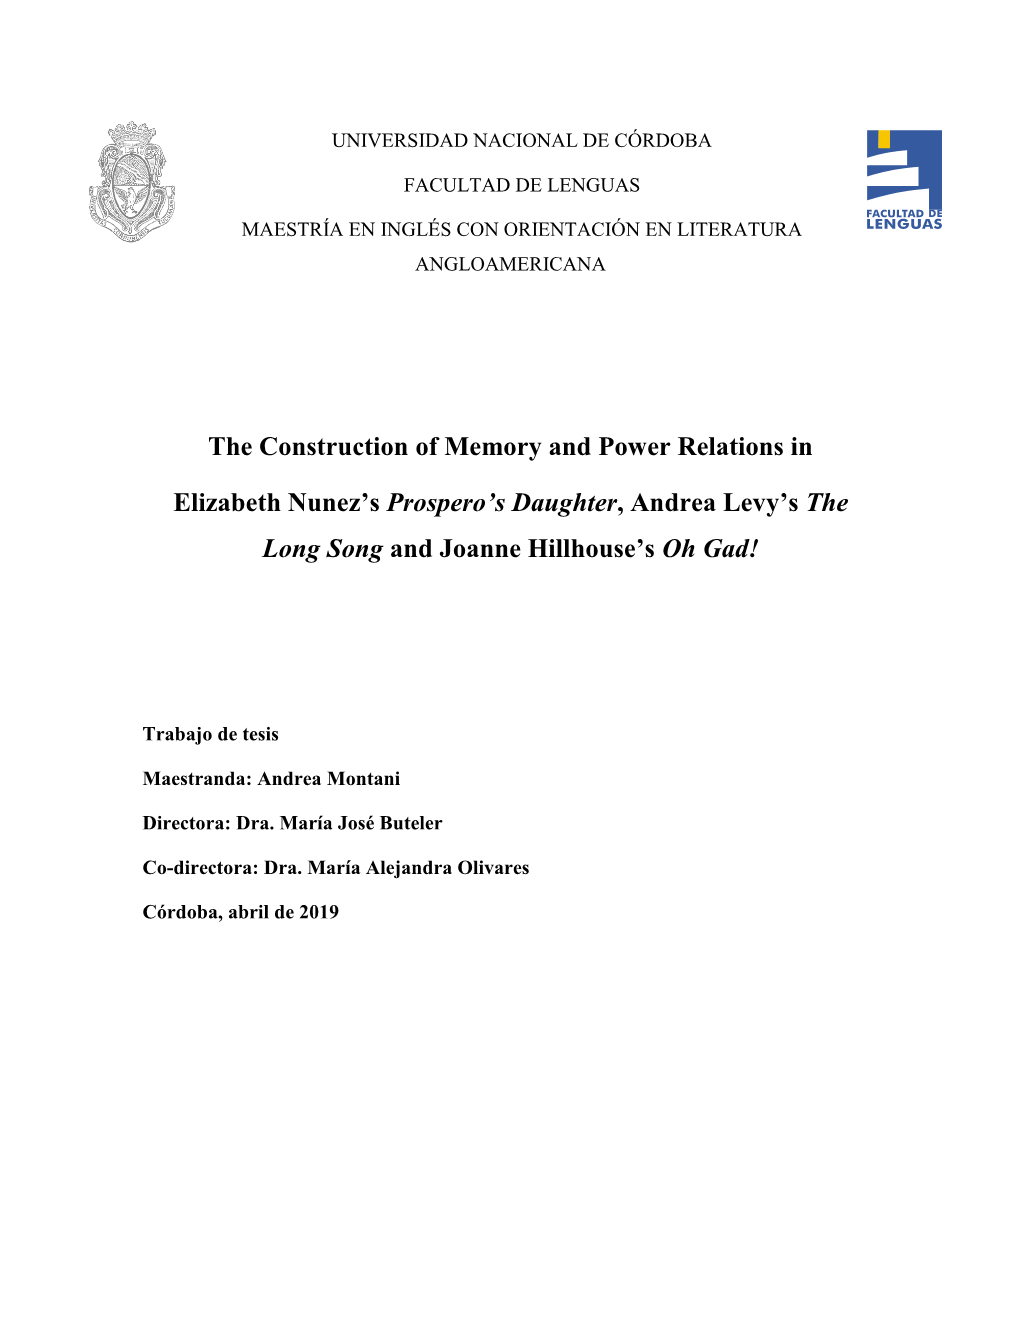 The Construction of Memory and Power Relations in Elizabeth